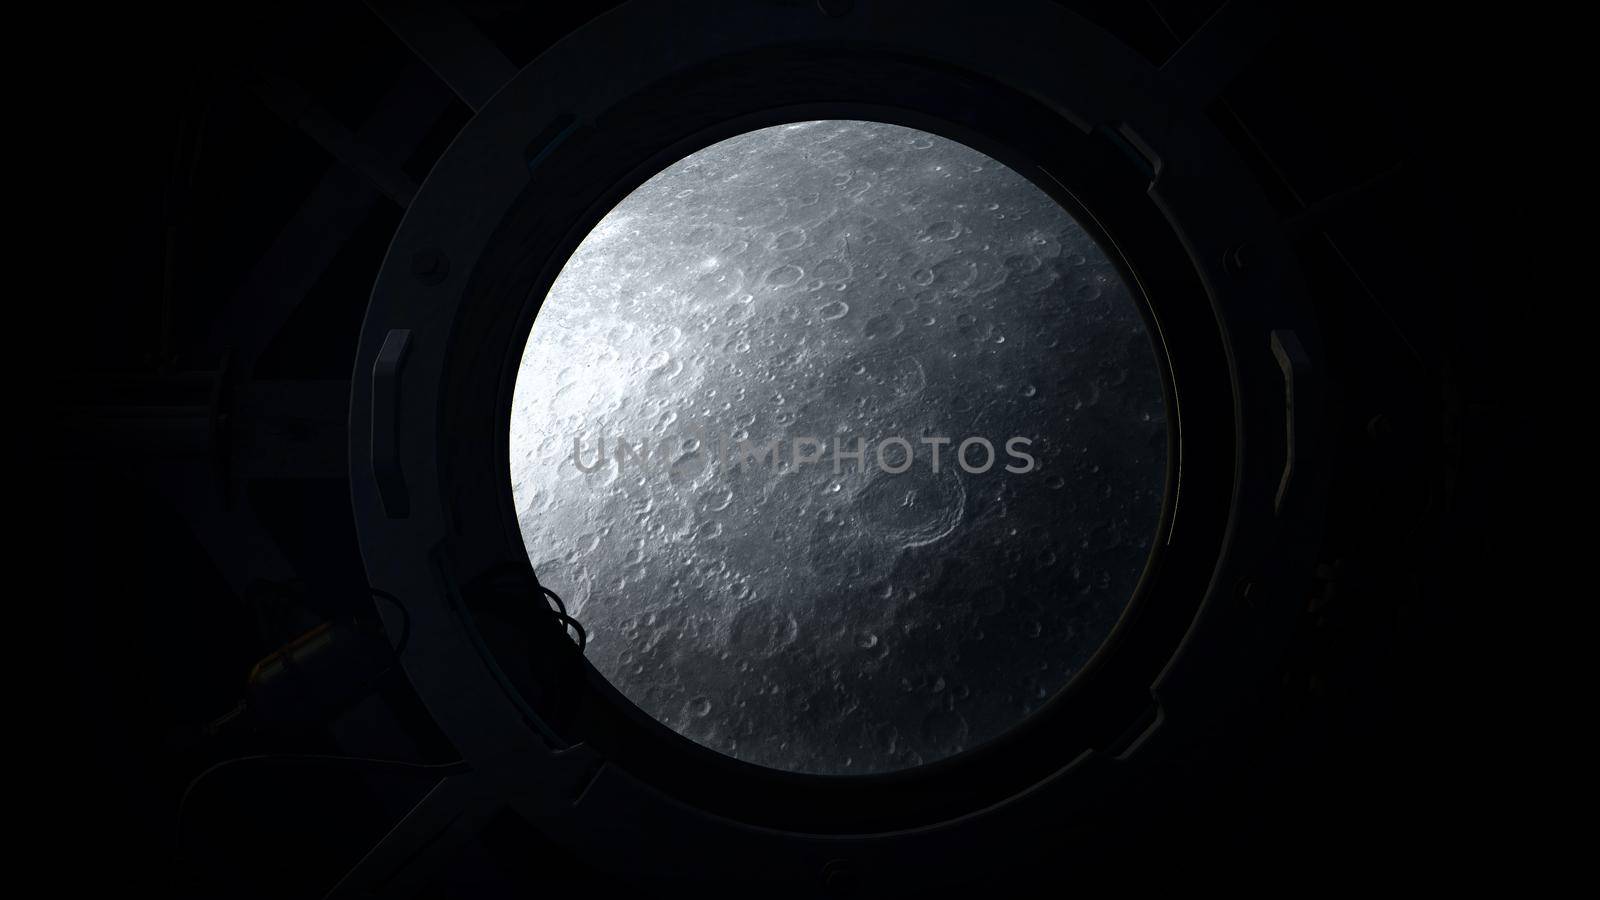 The gray moon is visible from the porthole of a spaceship approaching it.